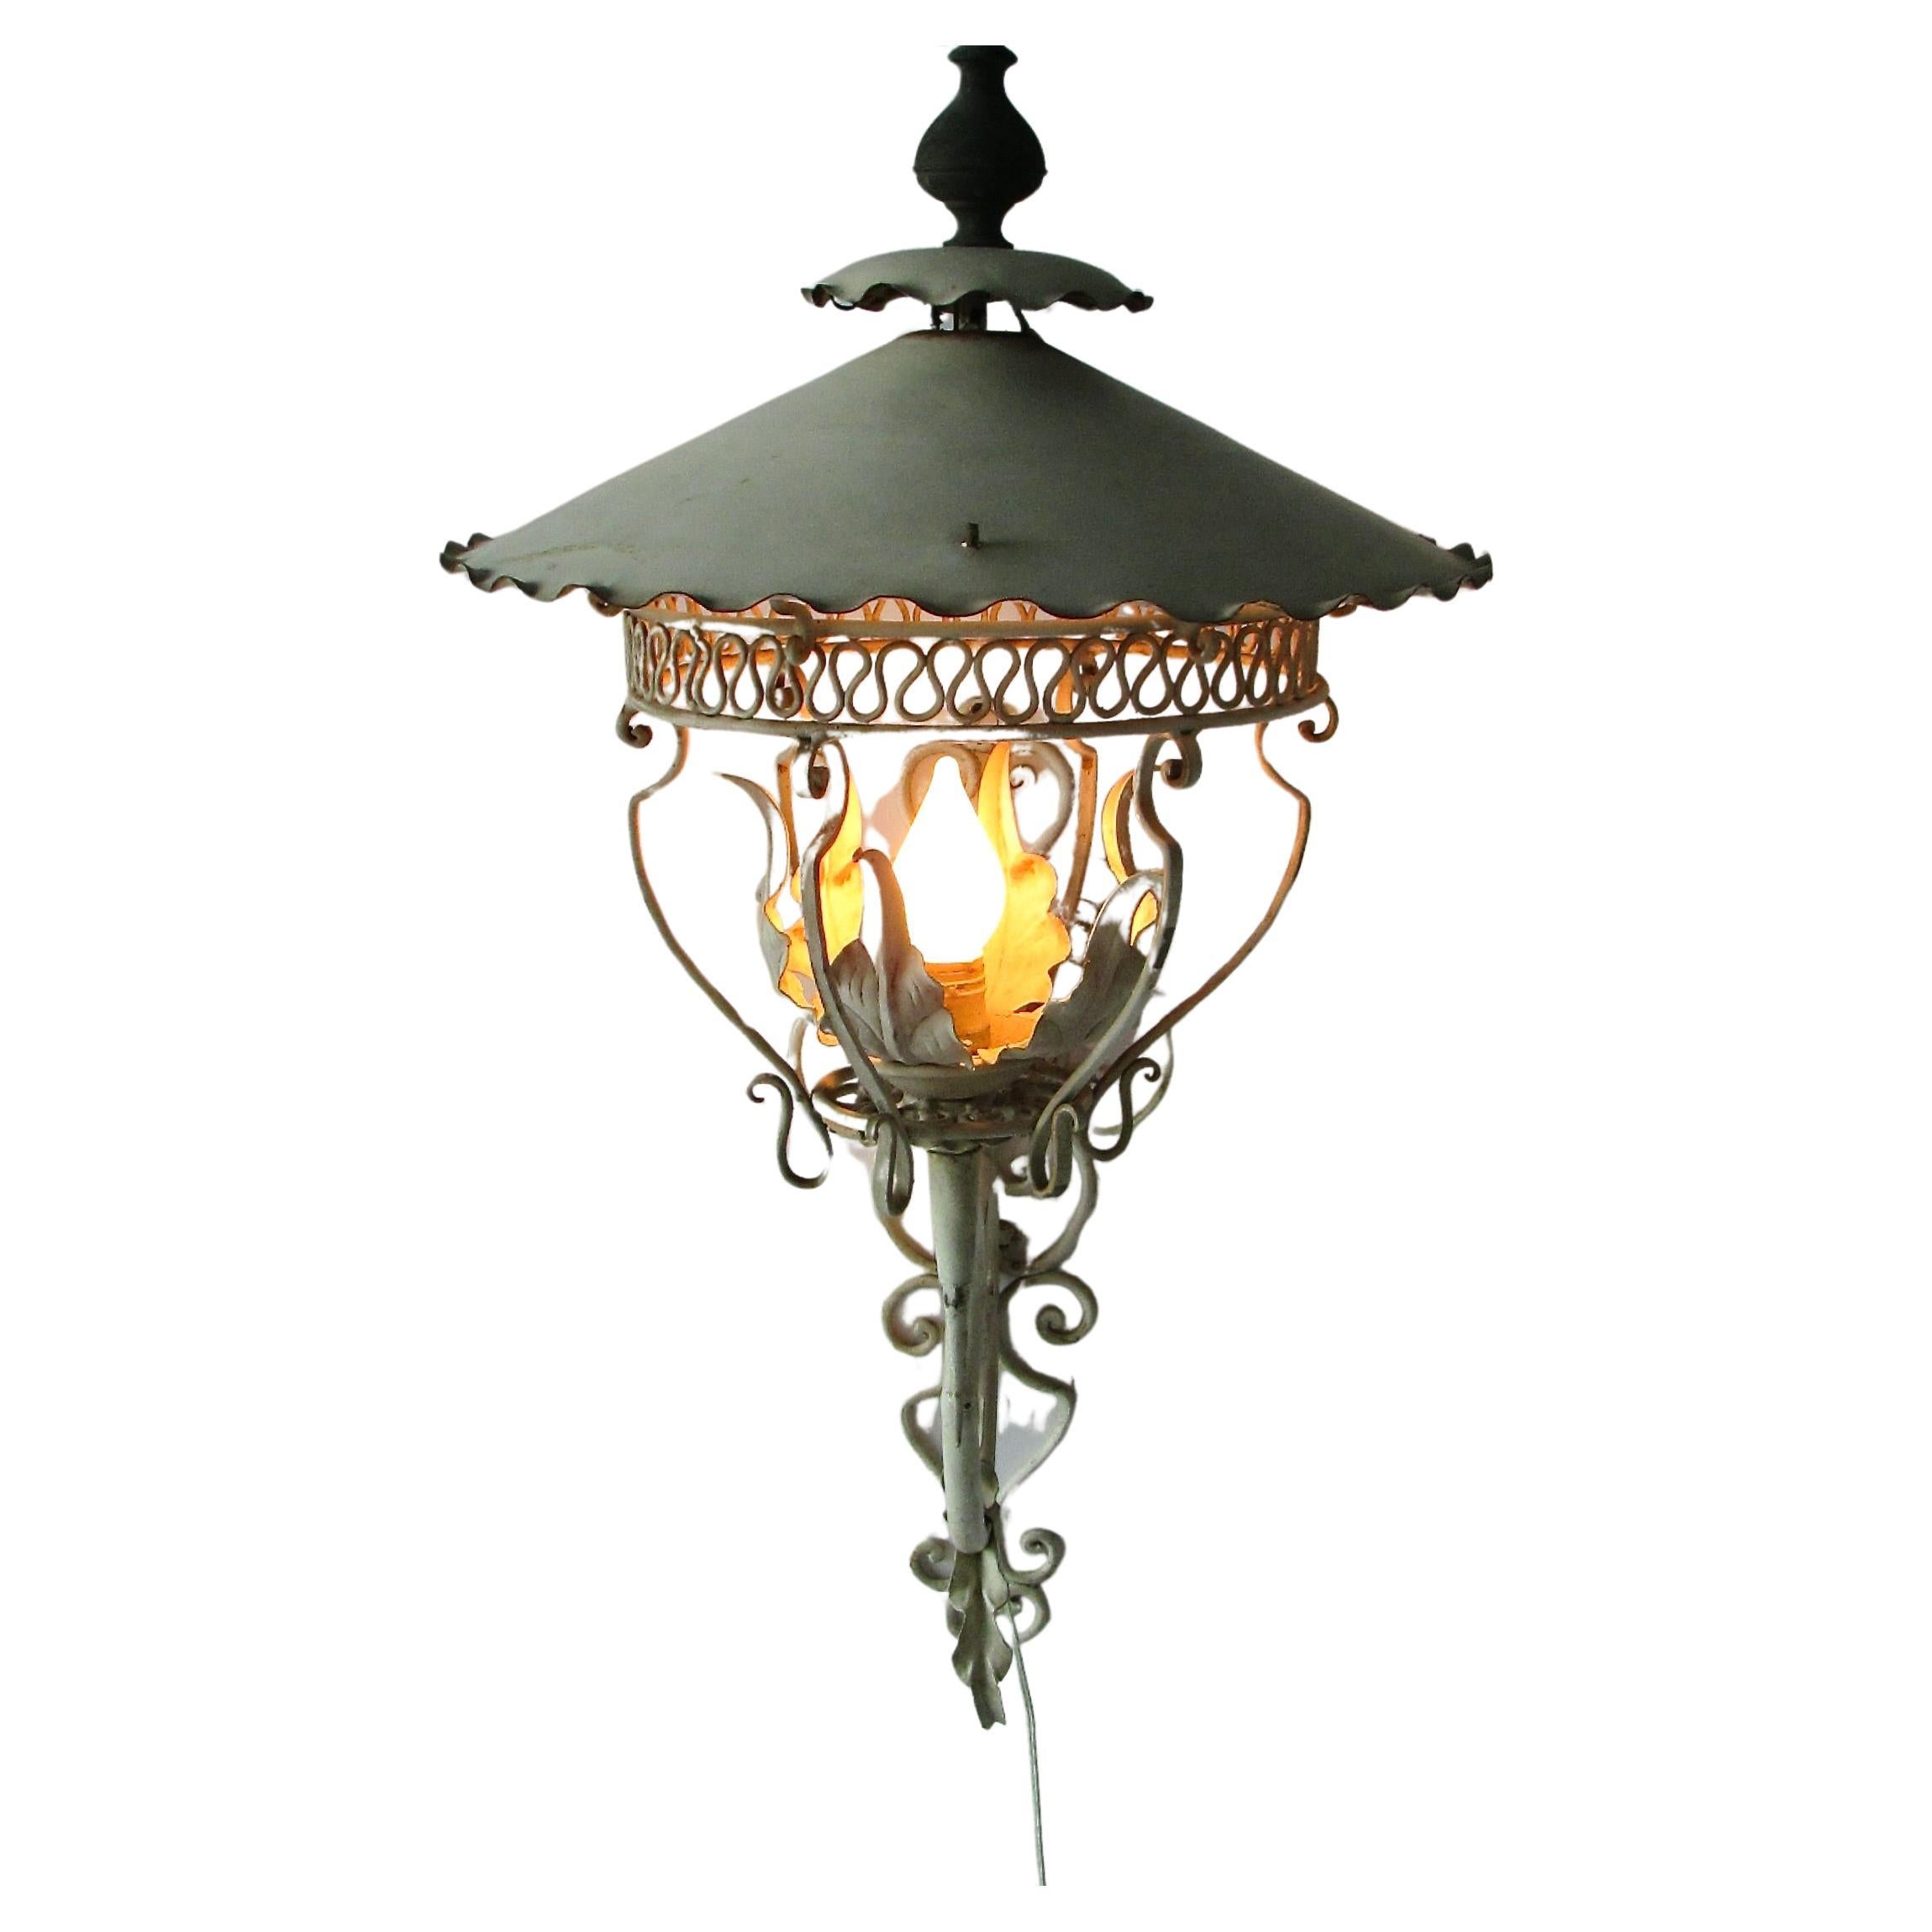 Large Wrought Iron Wall Sconce in Old Paint 